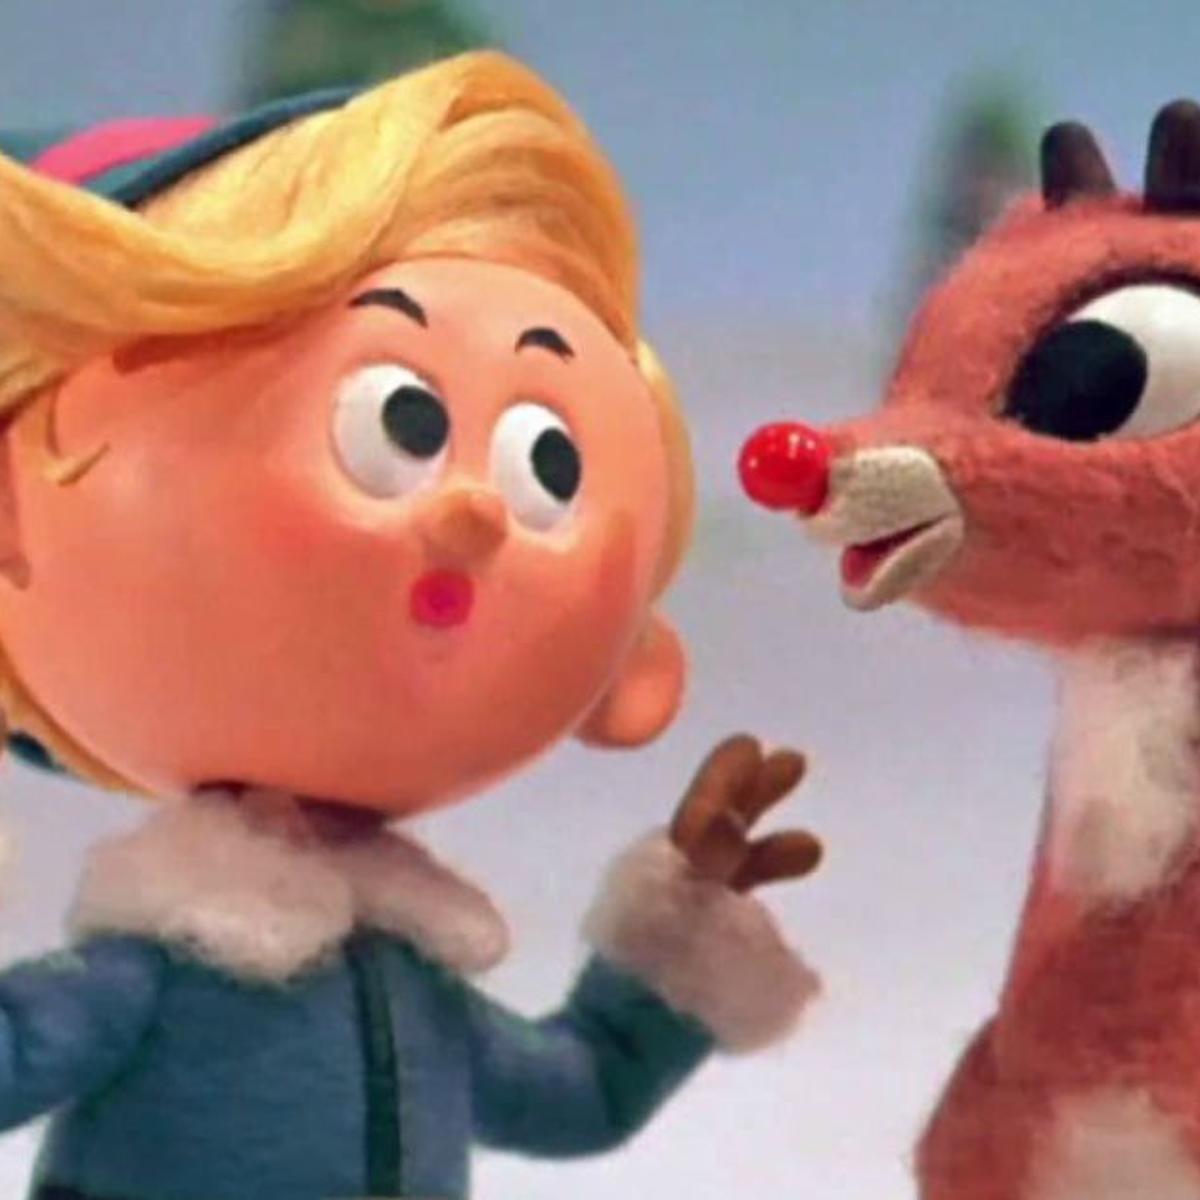 A 4 Year Old Reviews The 1964 Rudolph The Red Nosed Reindeer Tv Special Momaha Omaha Com,Dollar Tree Homemade Baby Shower Decorations